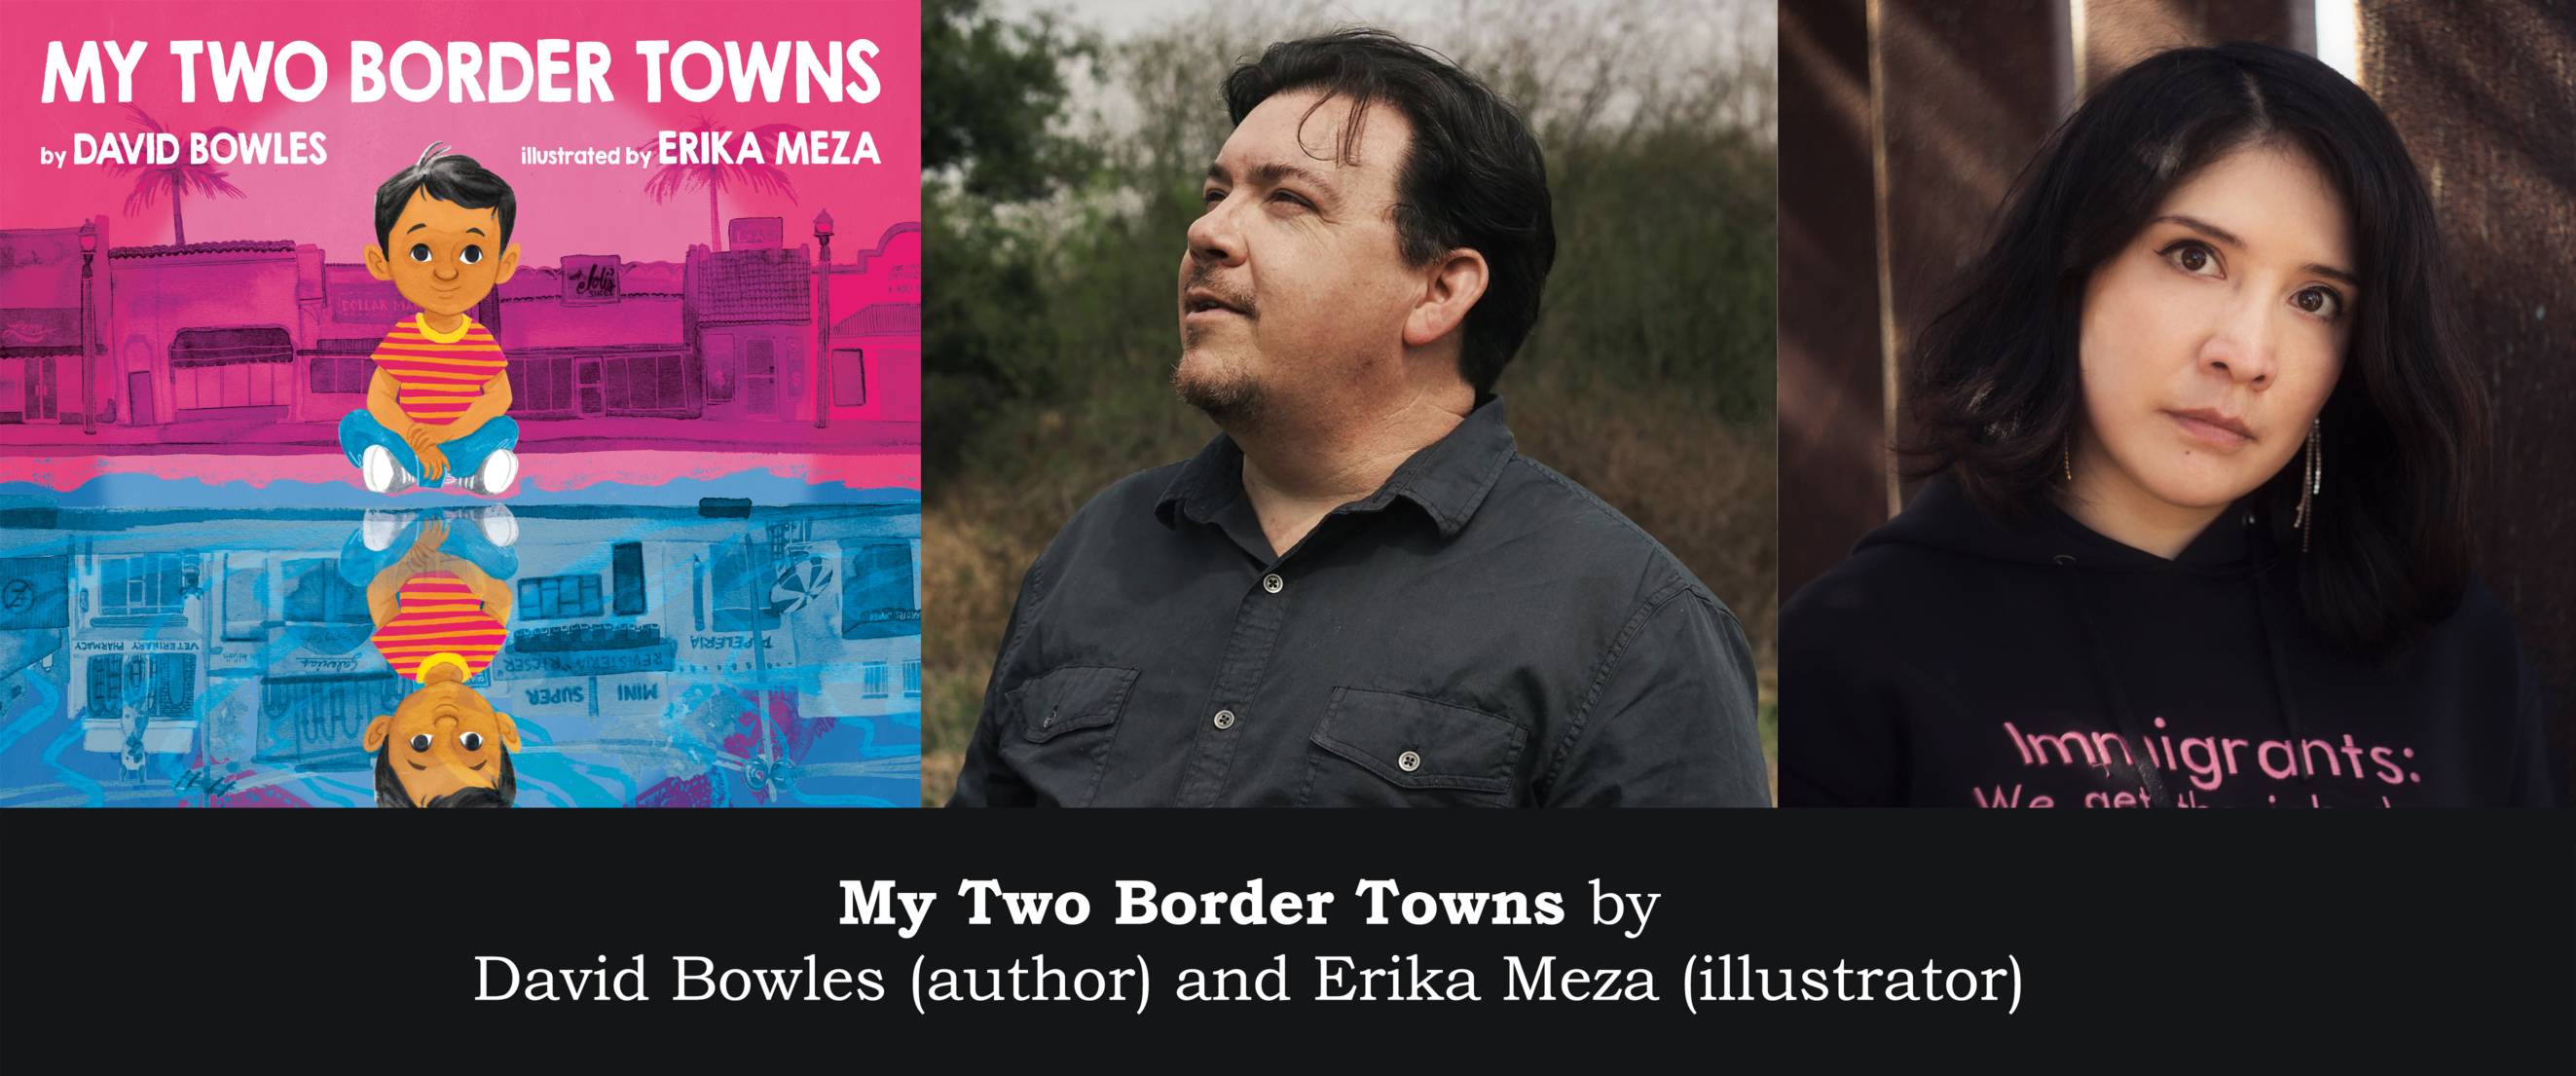 My Two Border Towns by  David Bowles (author) and Erika Meza (illustrator)